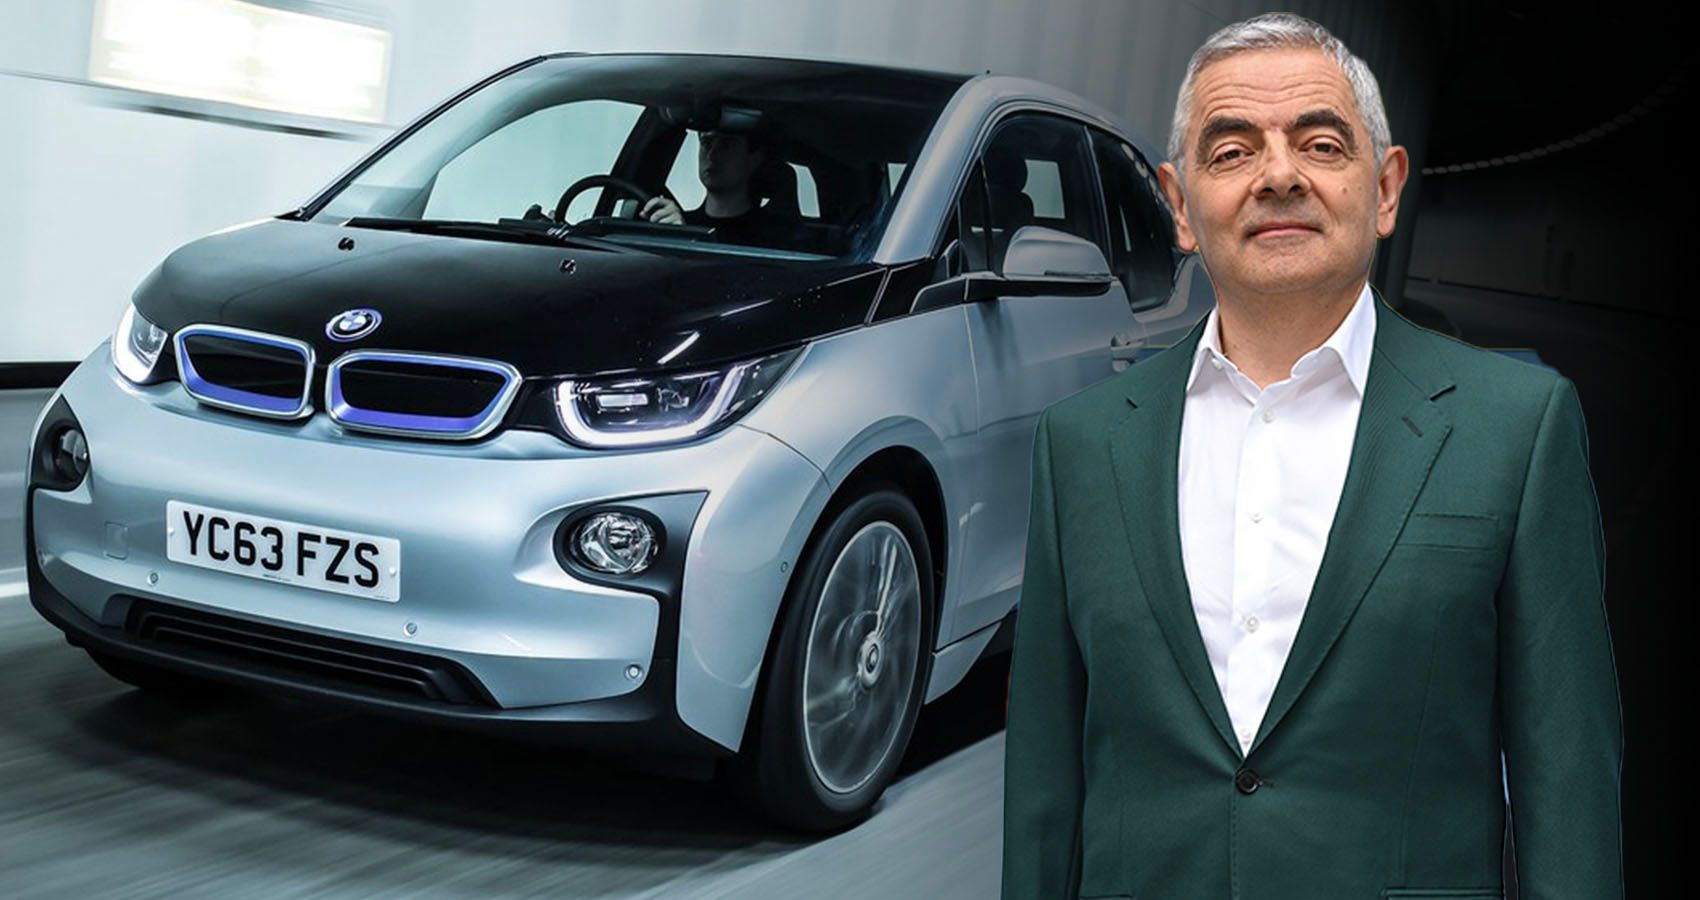 Early Adopter Rowan Atkinson Feels Duped By Electric Cars, Claims